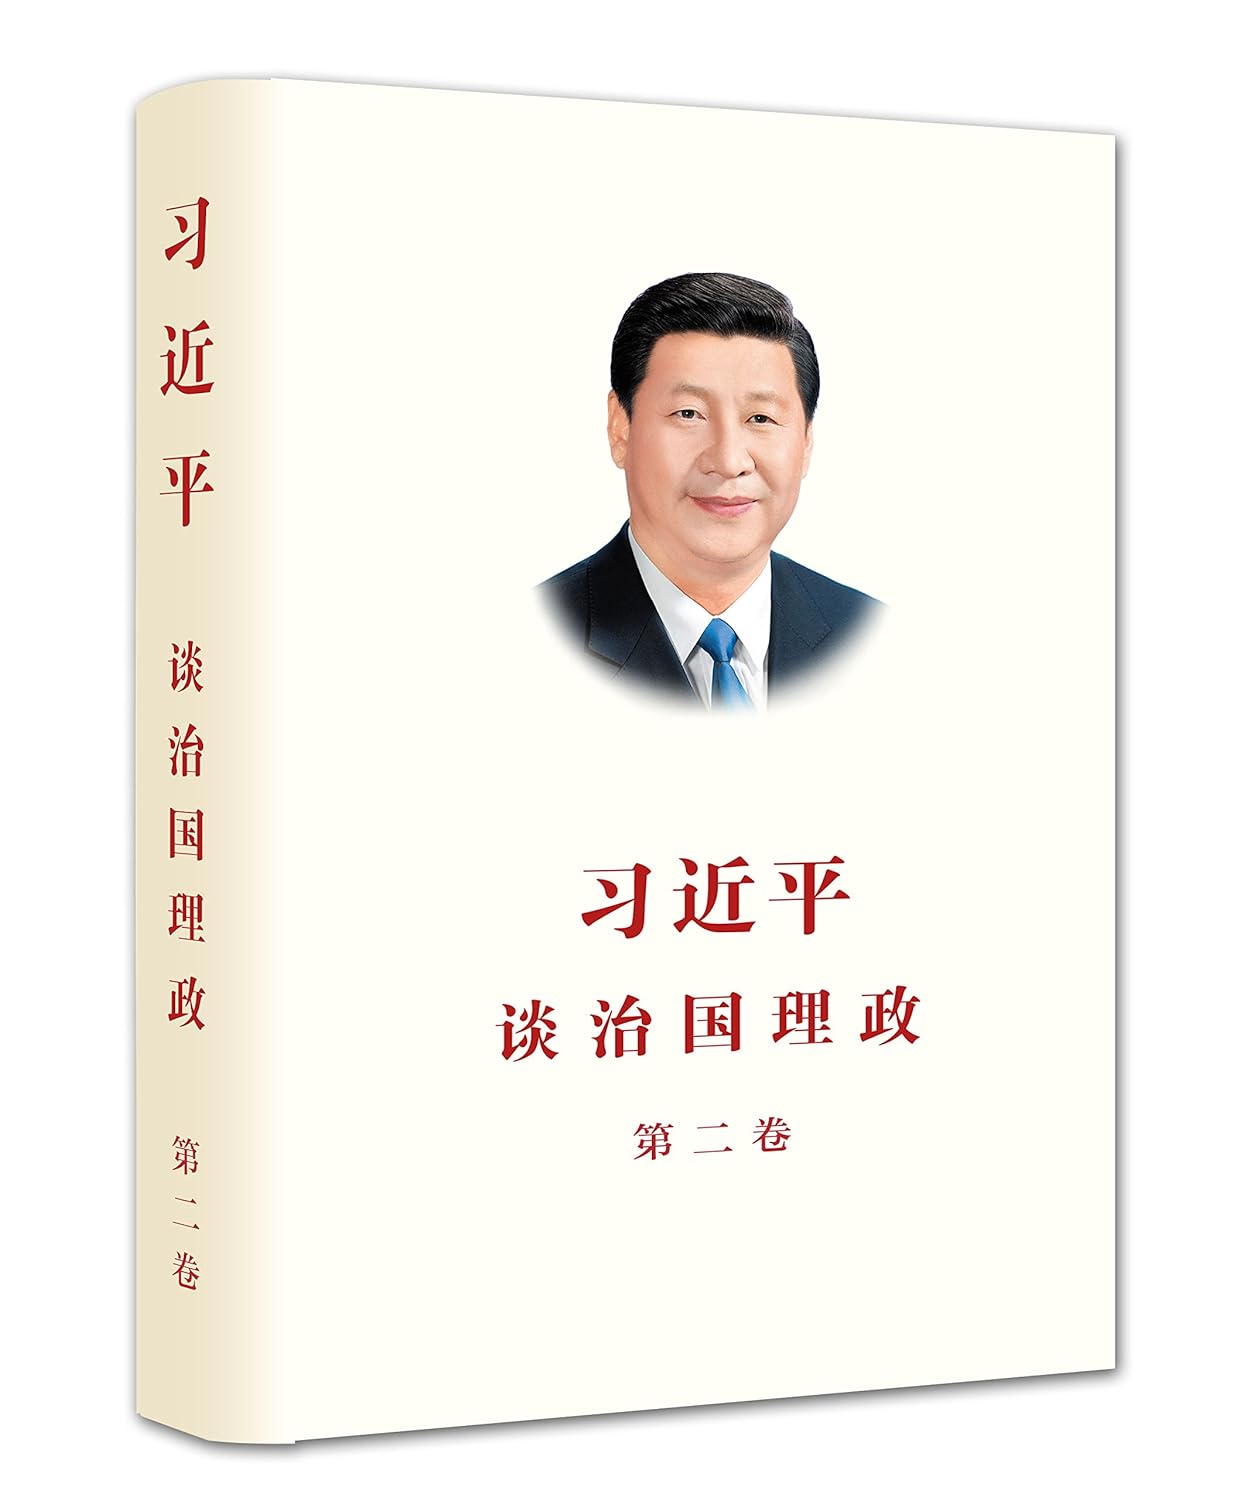 Xi Jinping: The Governance of China Vol. 2 (Chinese) - Paperback